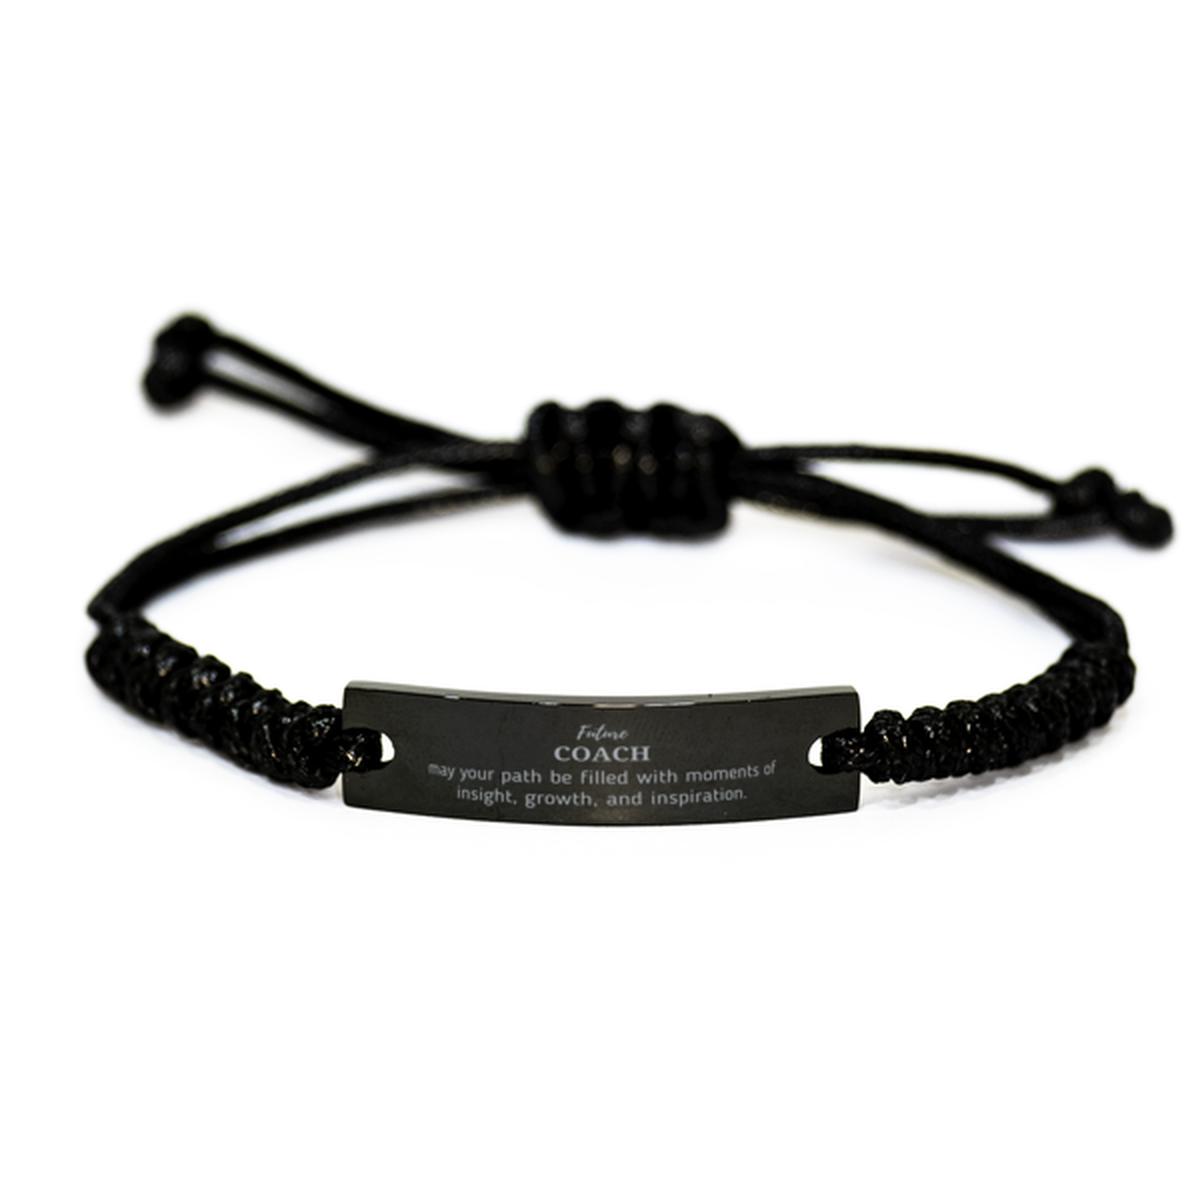 Future Coach Gifts, May your path be filled with moments of insight, Graduation Gifts for New Coach, Christmas Unique Black Rope Bracelet For Men, Women, Friends